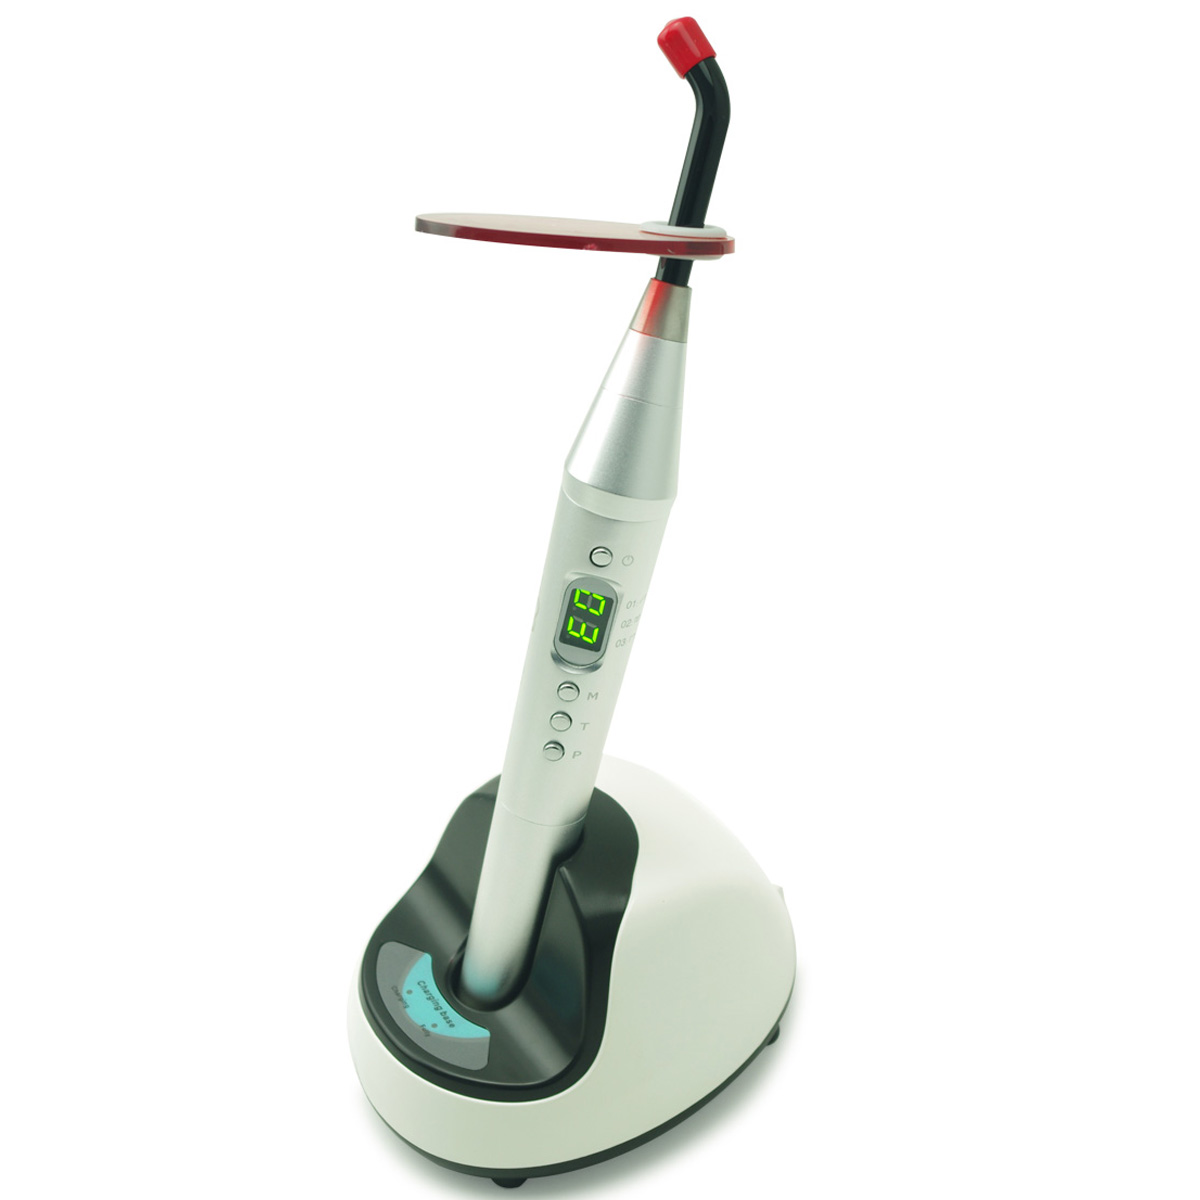 Spark Cordless LED Curing Light with Adjustable Brightness - 1 Count 9 Watt Professional Cure Lamp